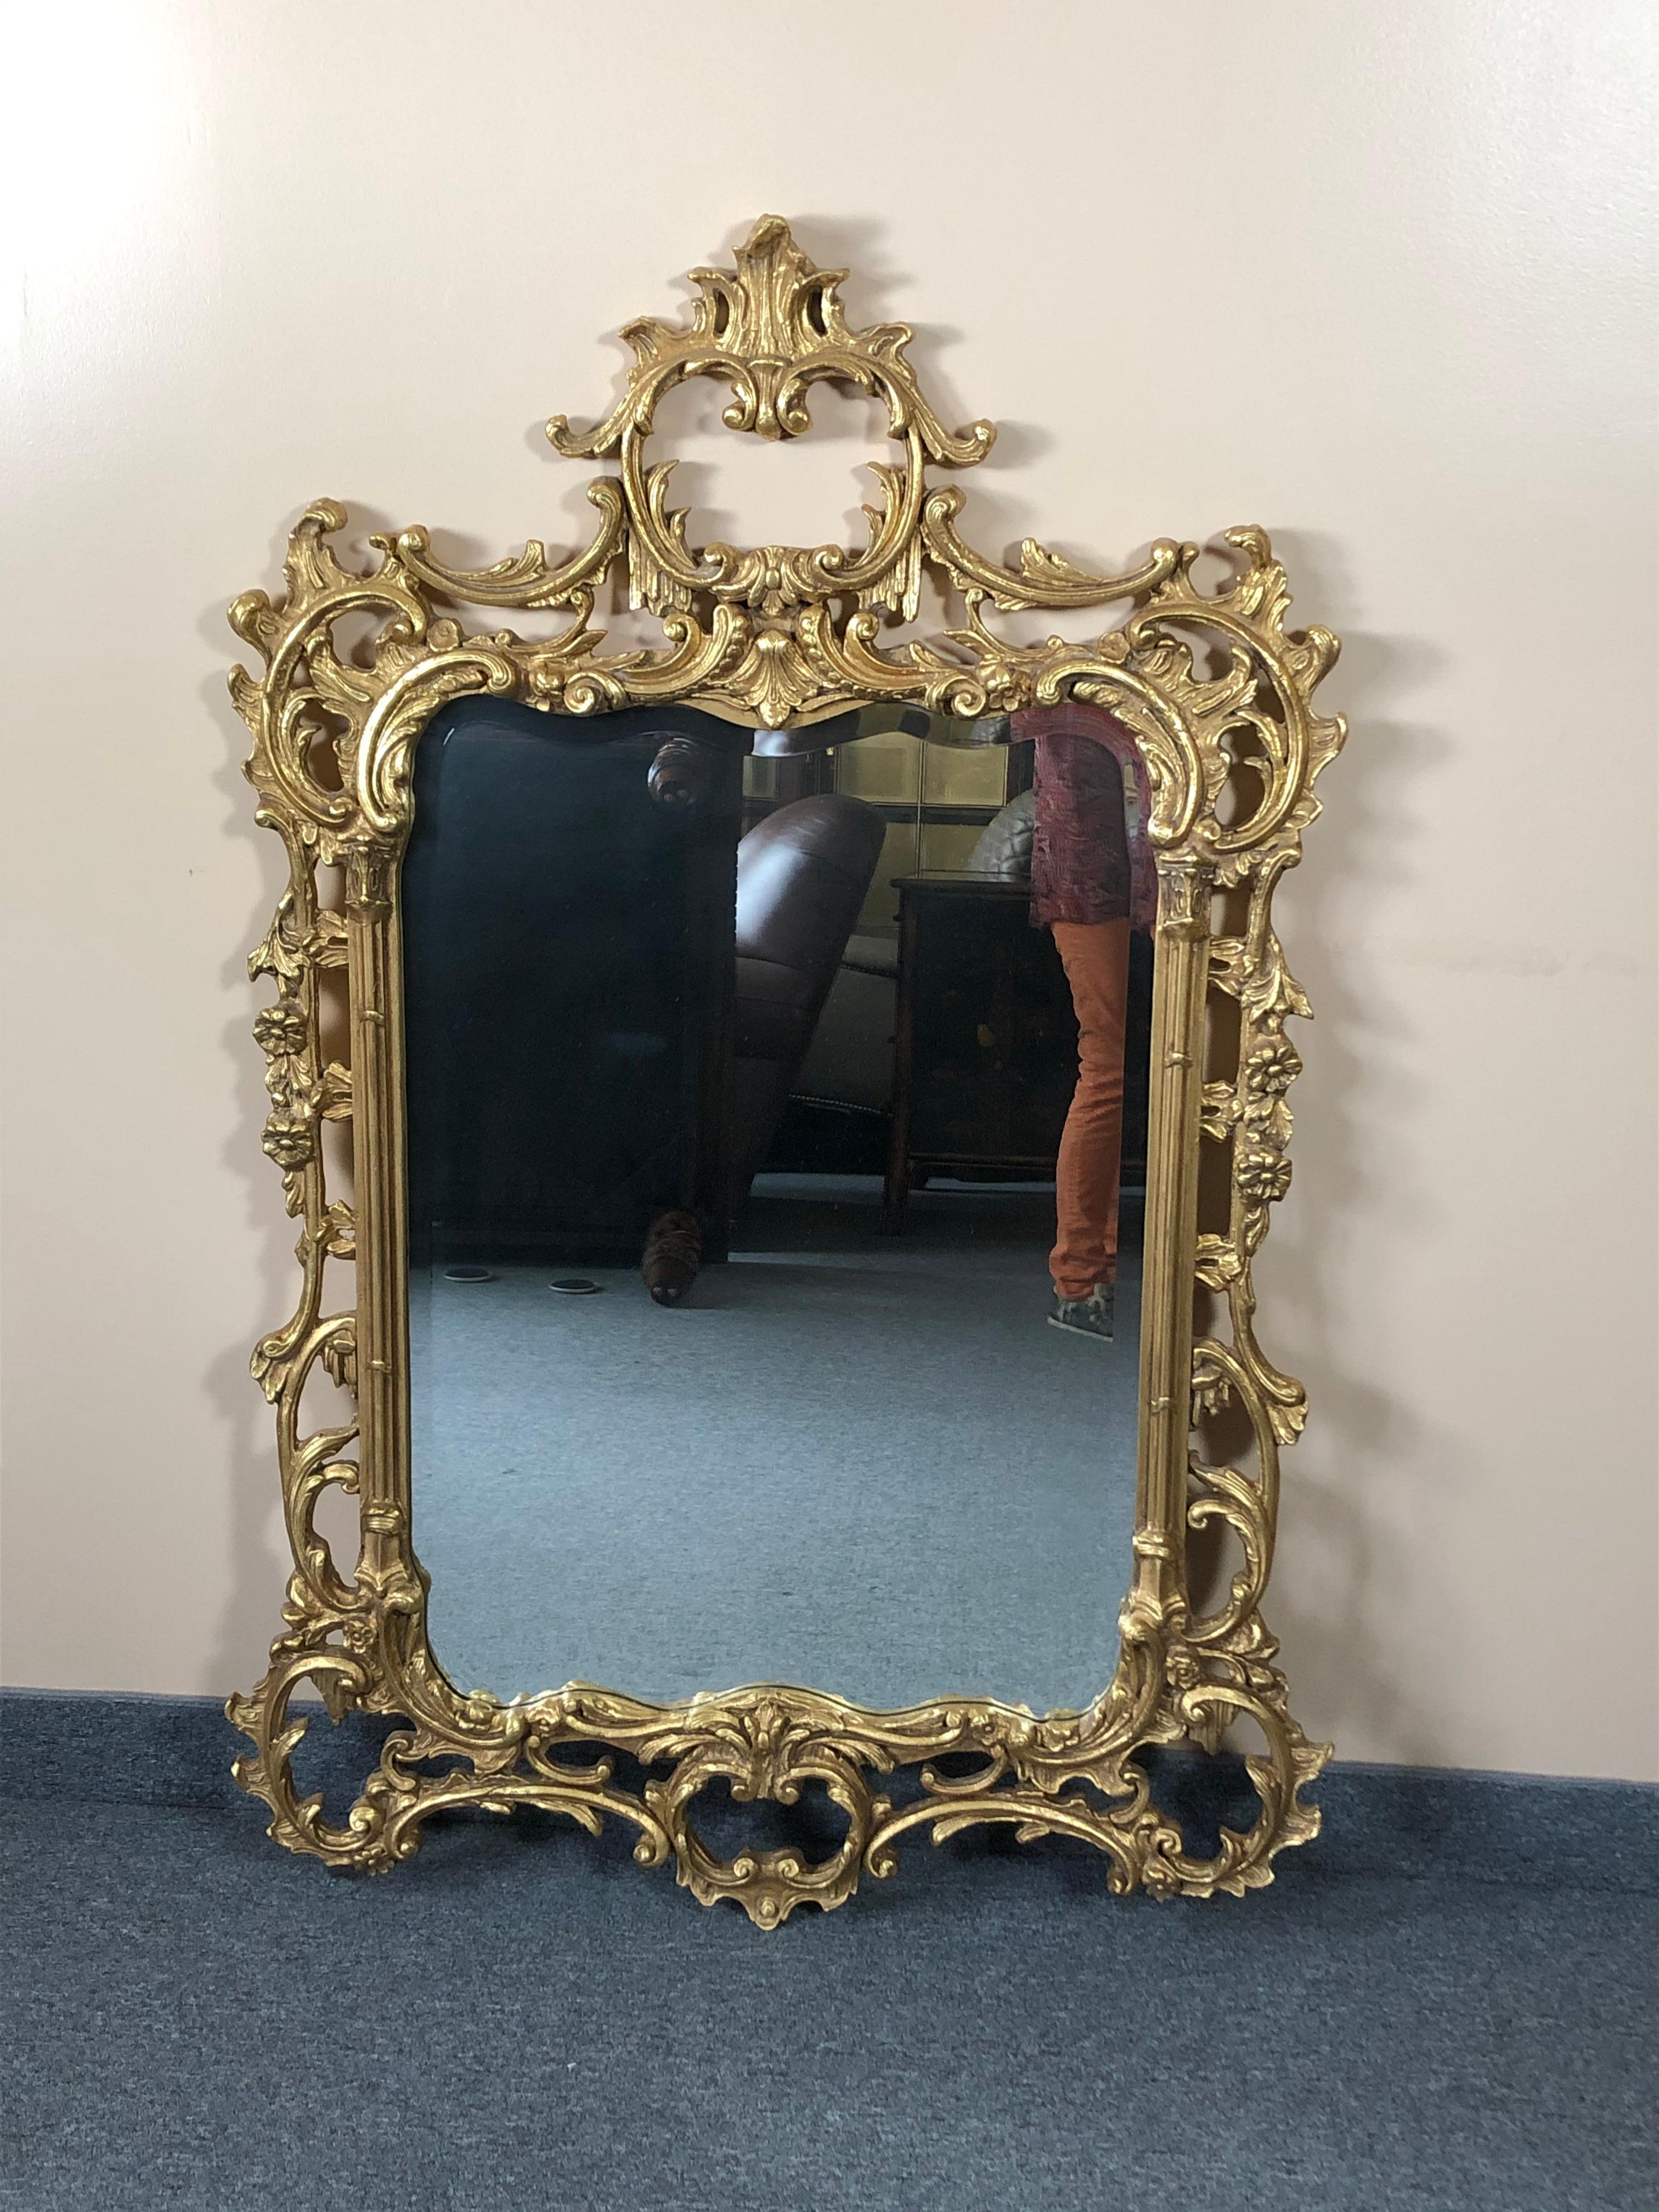 Dramatic giltwood rococo style mirror with curlicues and gesso embellishments. Mirror is bevelled and top quality.